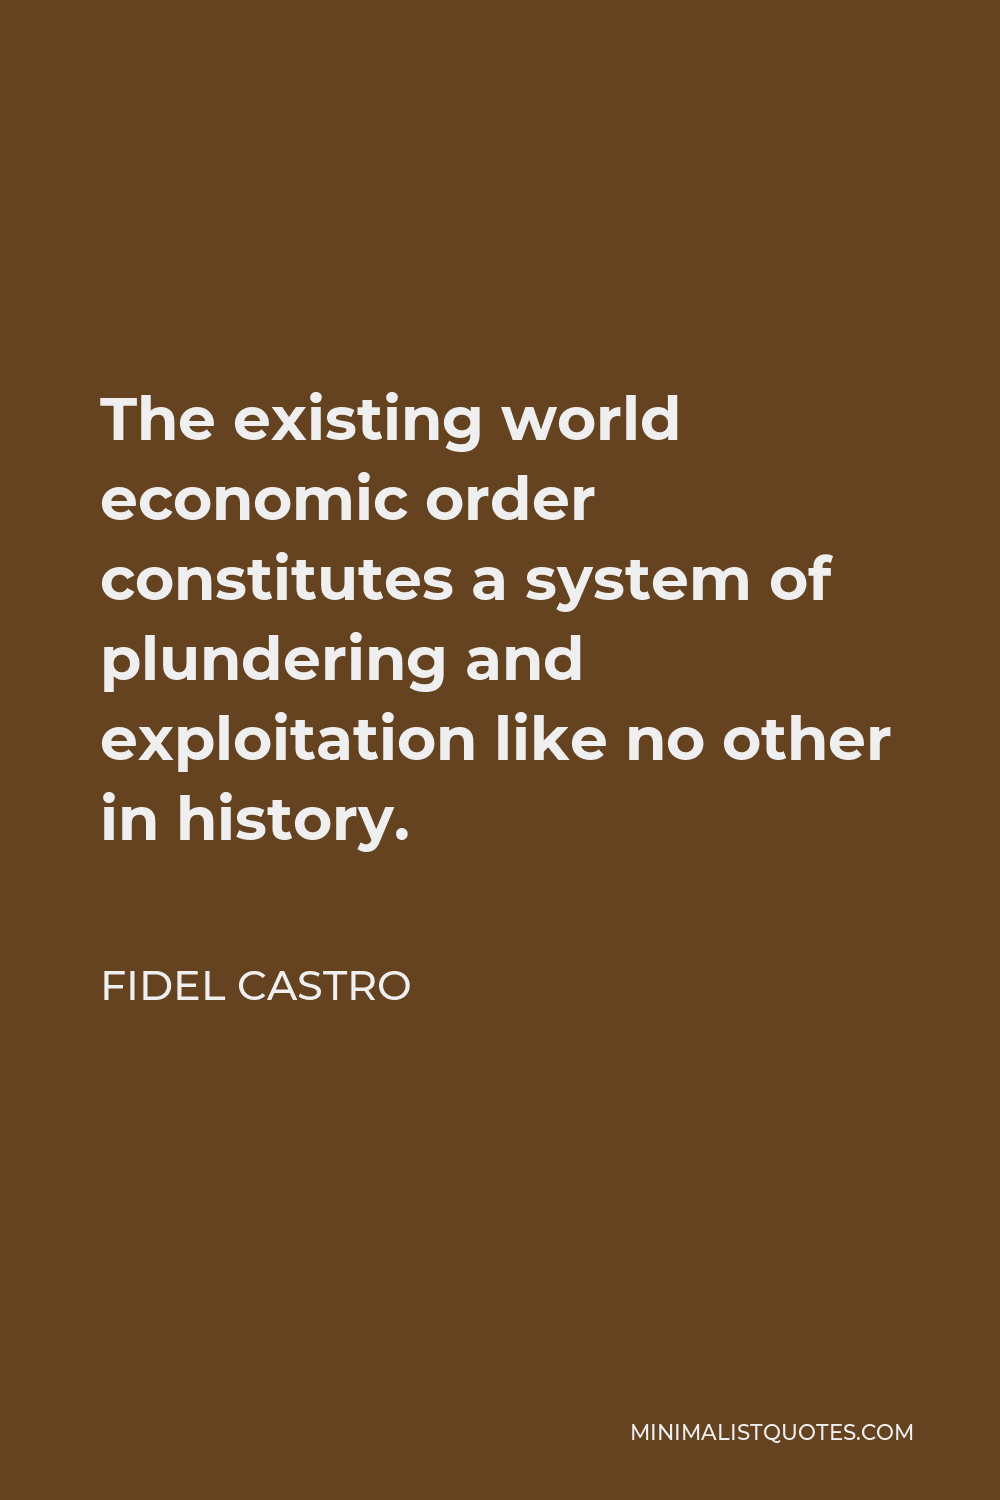 Fidel Castro Quote - The existing world economic order constitutes a system of plundering and exploitation like no other in history.